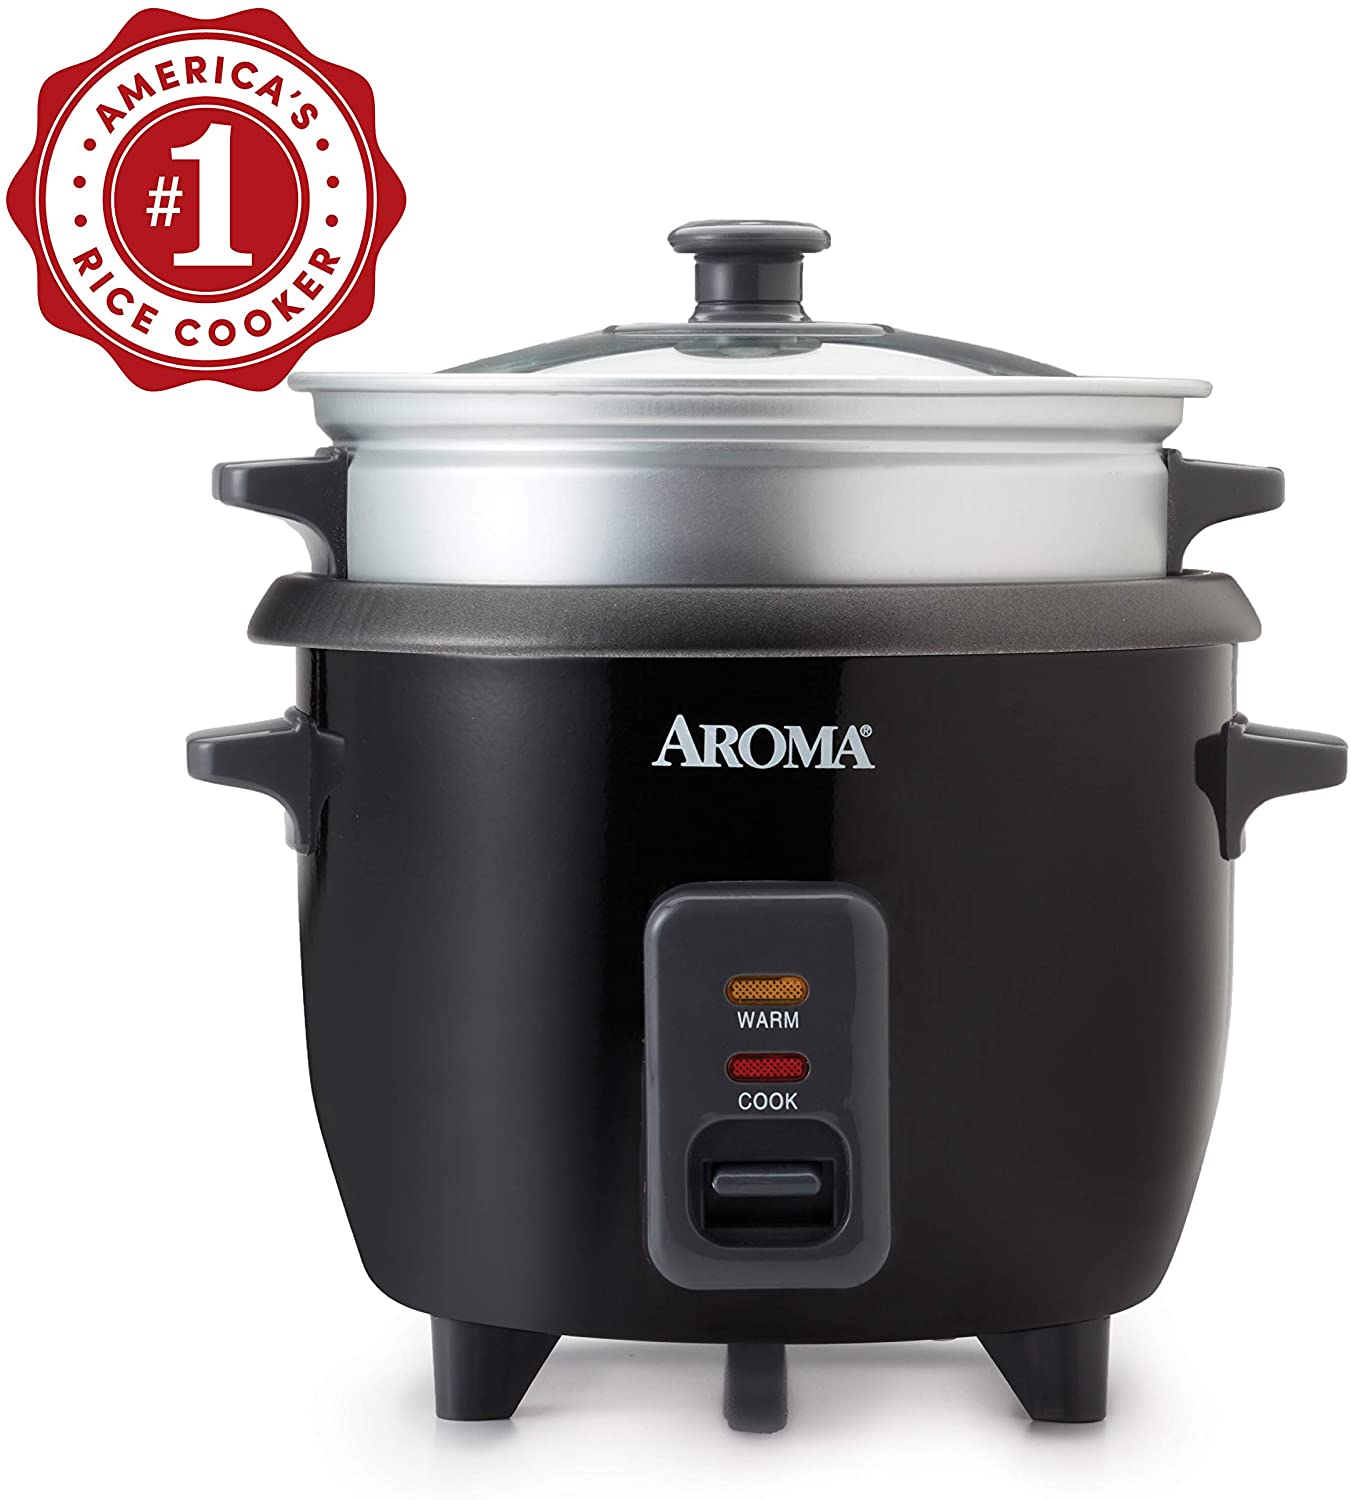 Aroma Housewares ARC-363-1NGB 2-6 cups Cooked Rice cooker, Steamer, Multicooker, Silver